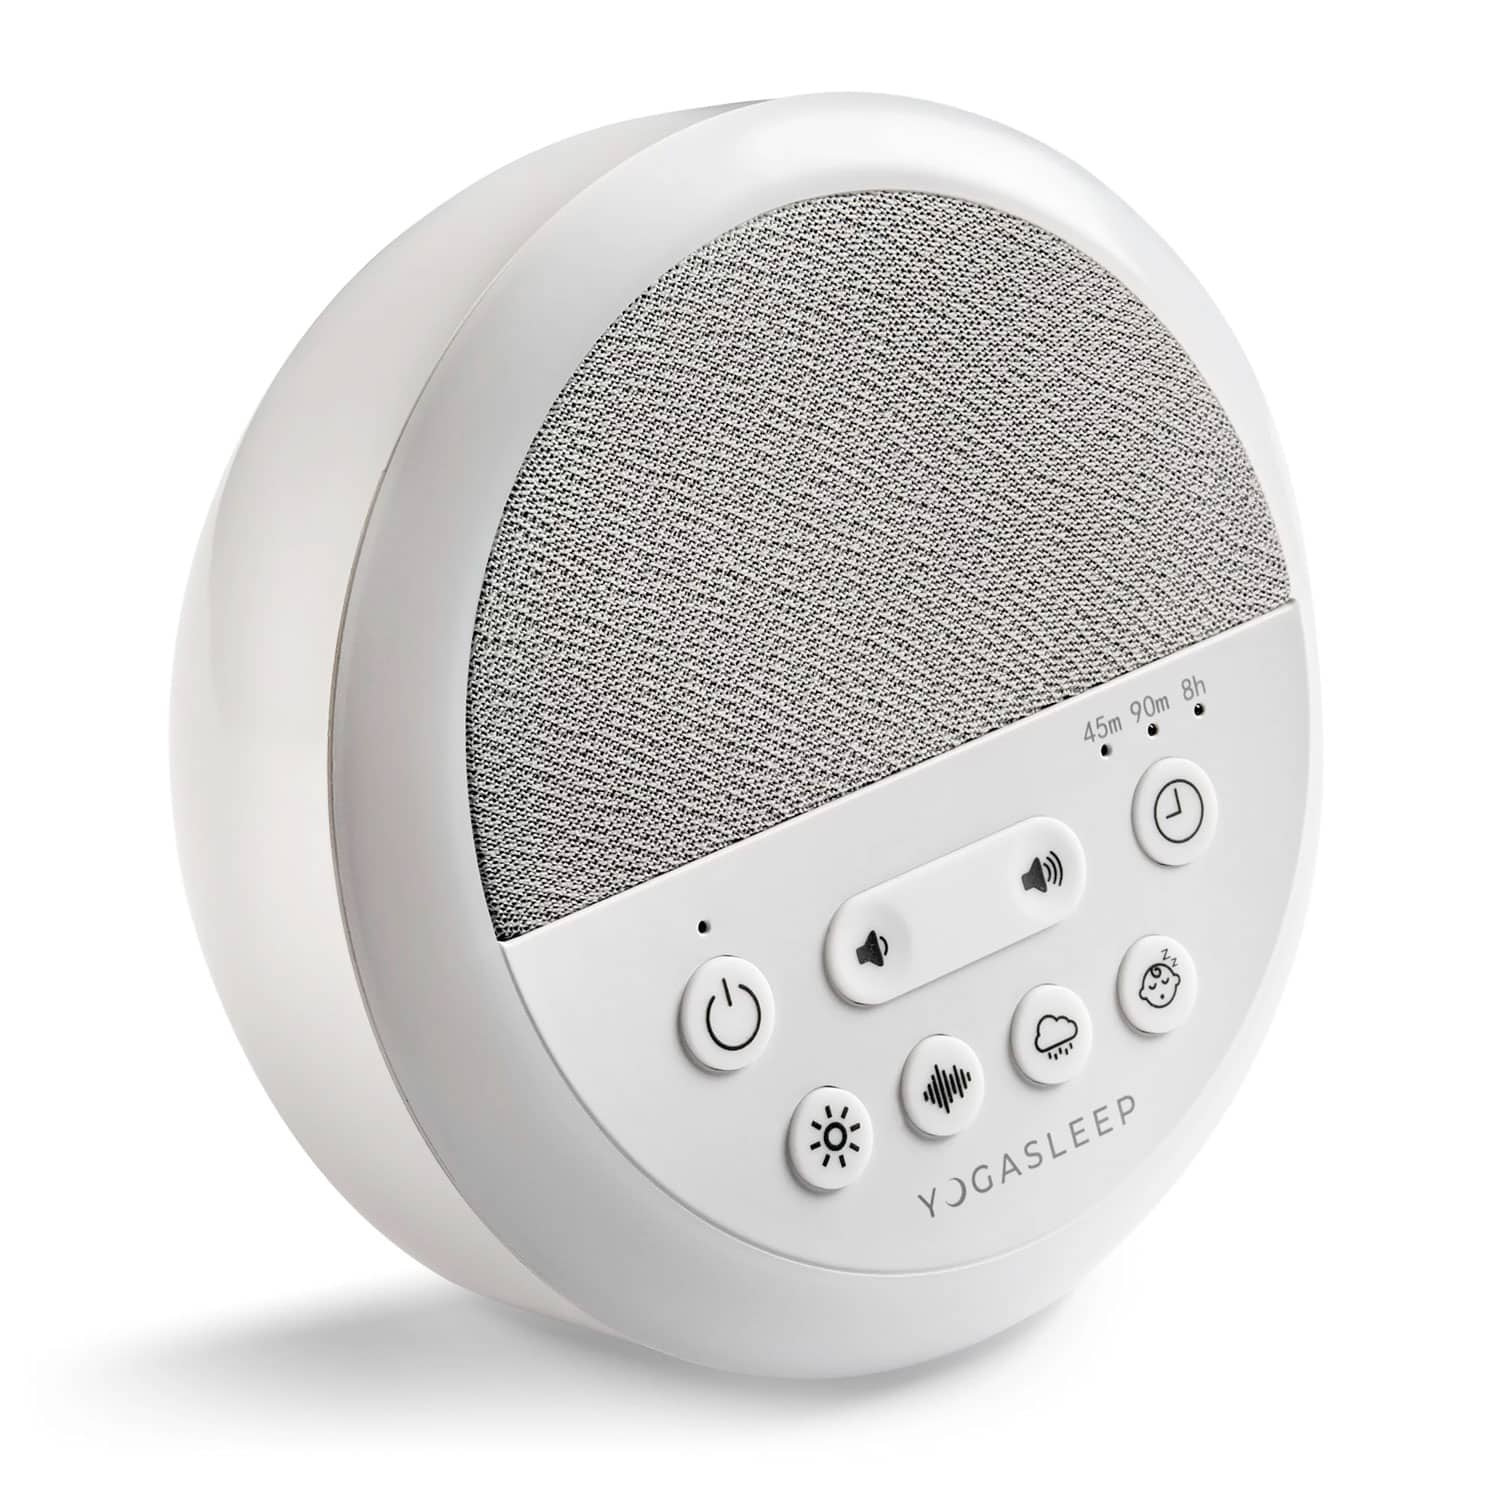 Yogasleep Baby Nod White Noise Sound Machine with Dimmable Night Light, White